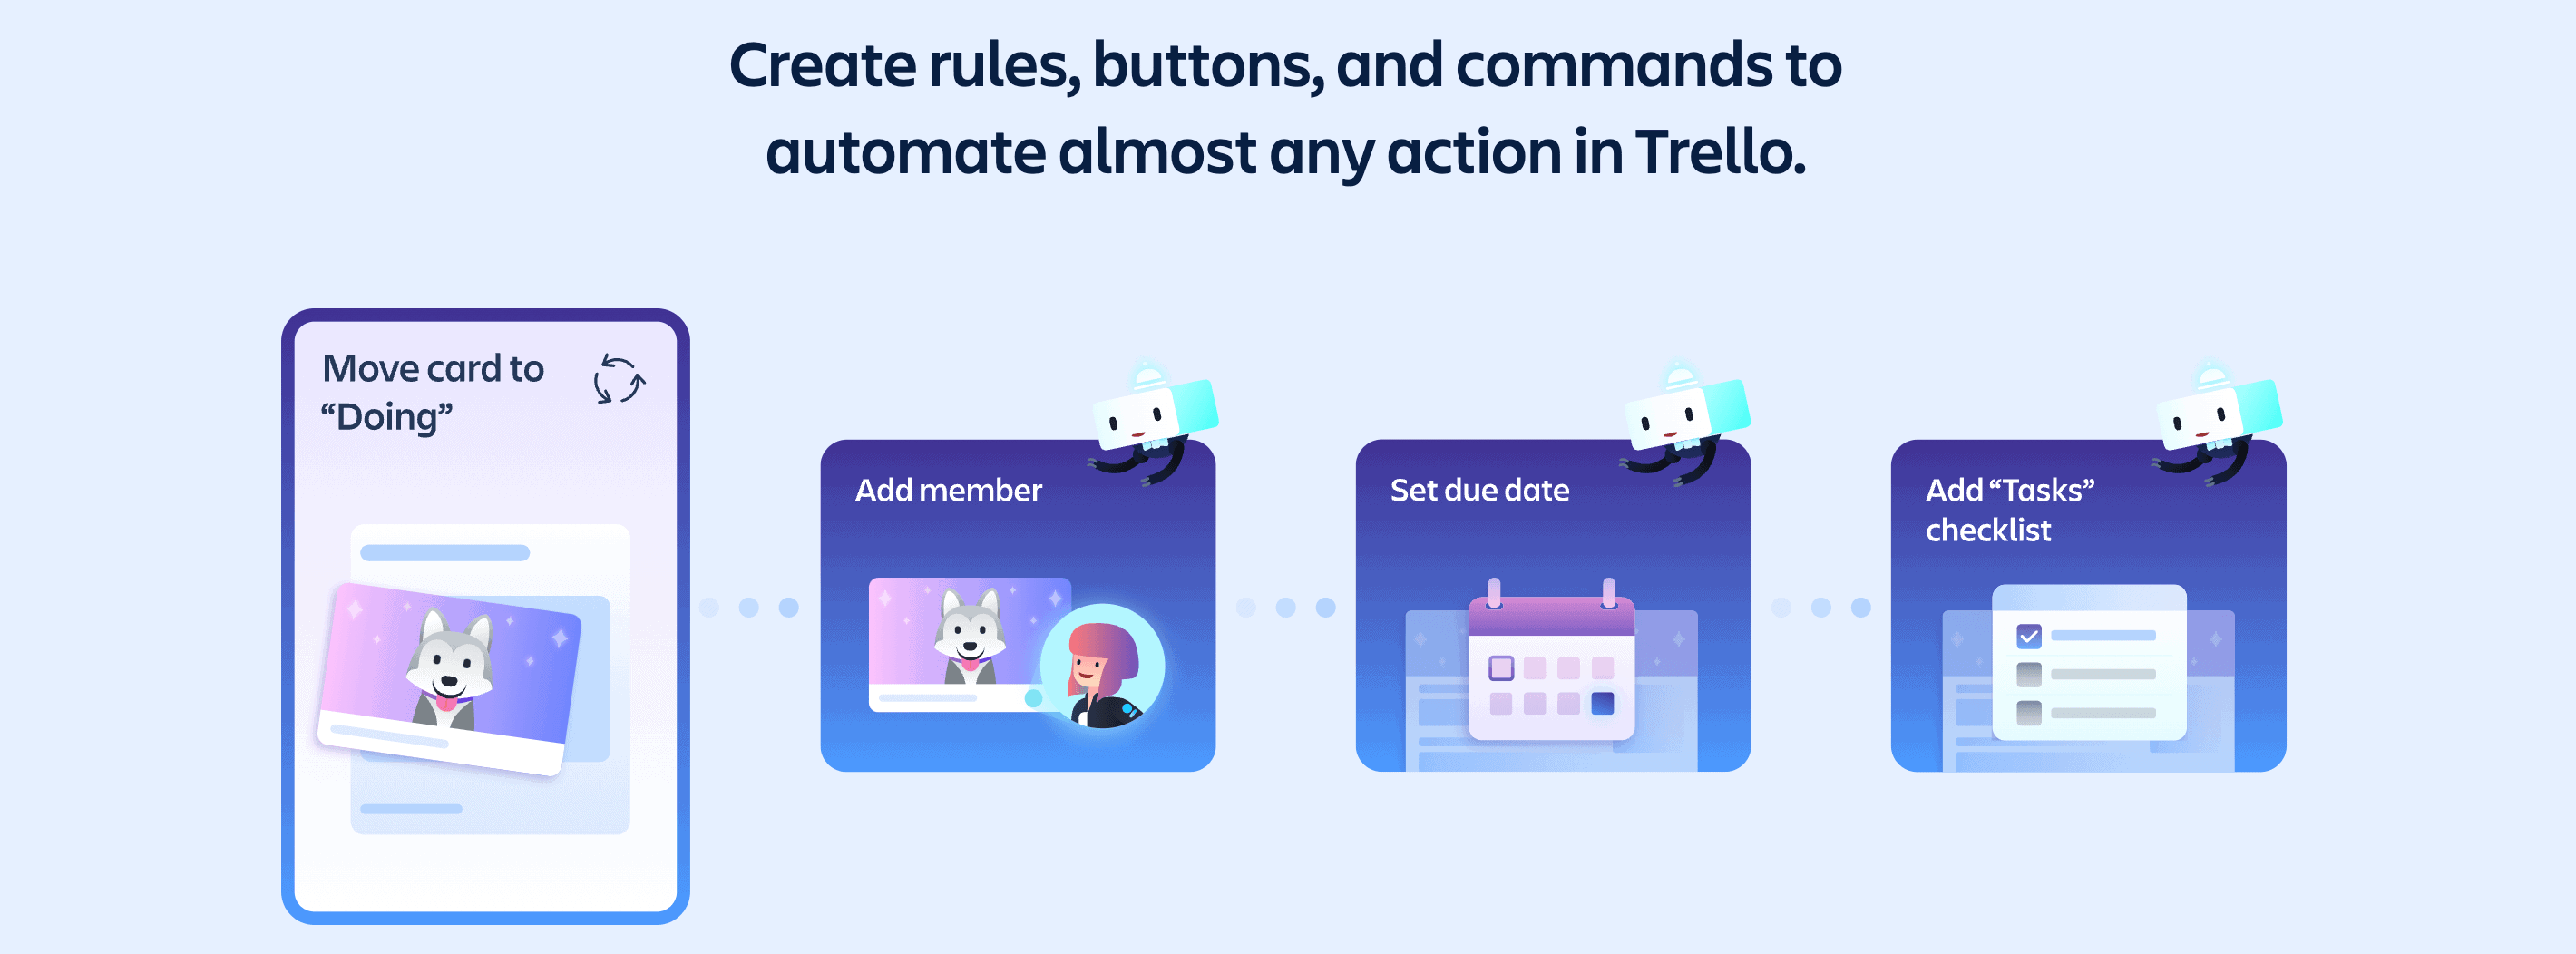 Use Trello’s automation Butler to create rules, buttons, and commands